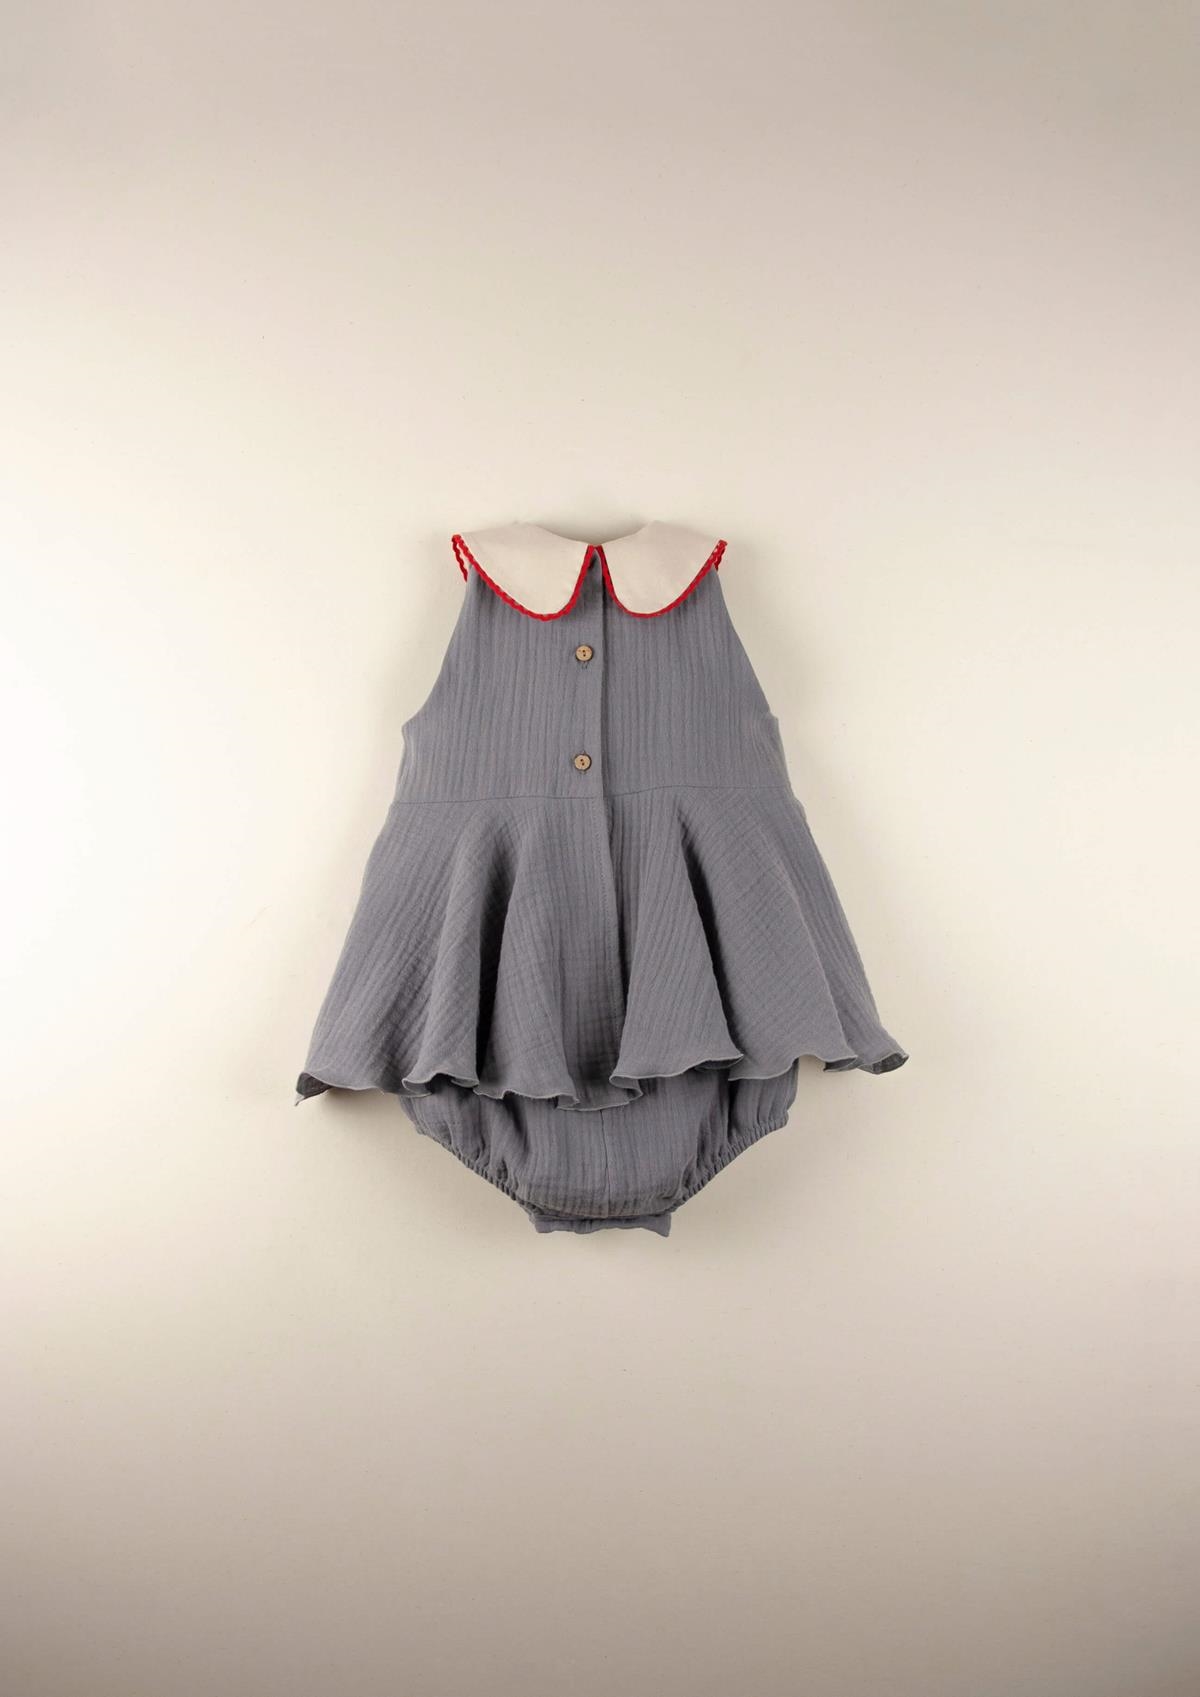 Mod.7.3 Greyish-blue romper suit with embroidered collar | SS22 Mod.7.3 Greyish-blue romper suit with embroidered collar | 1